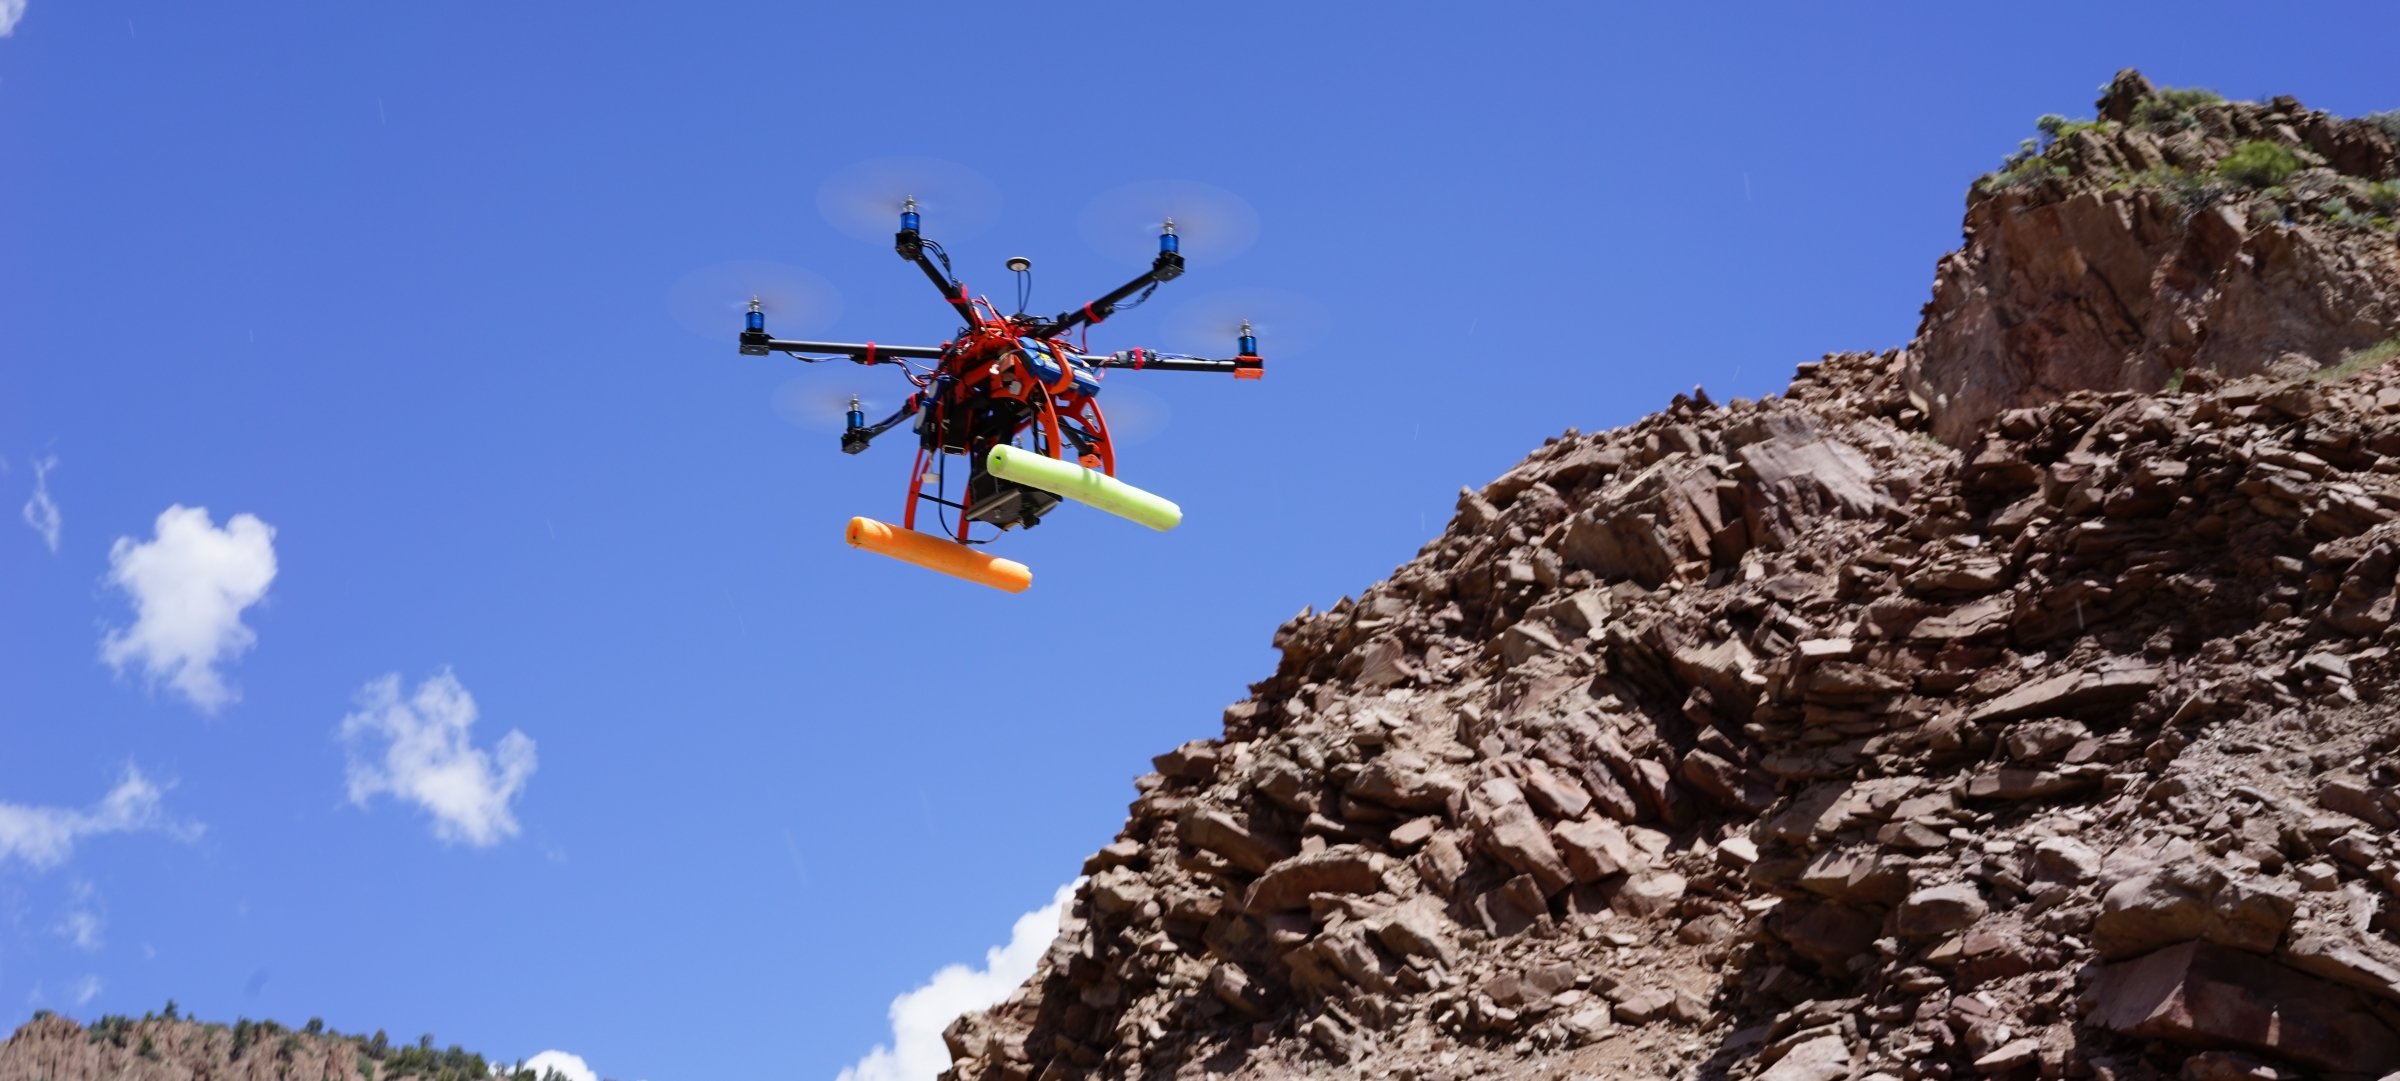 Hexacopter flying above a rocky hill.